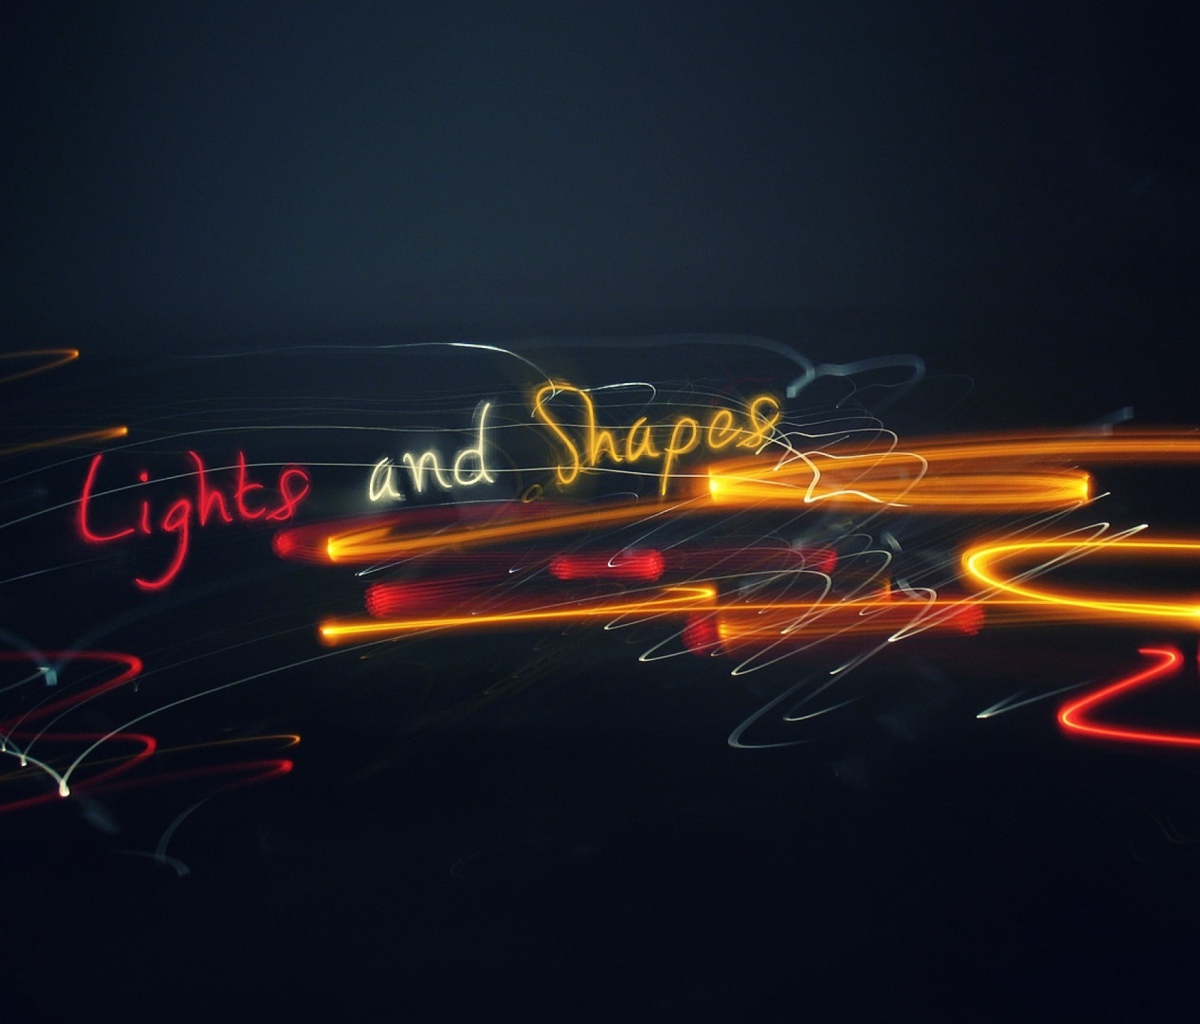 Das Lights And Shapes Wallpaper 1200x1024